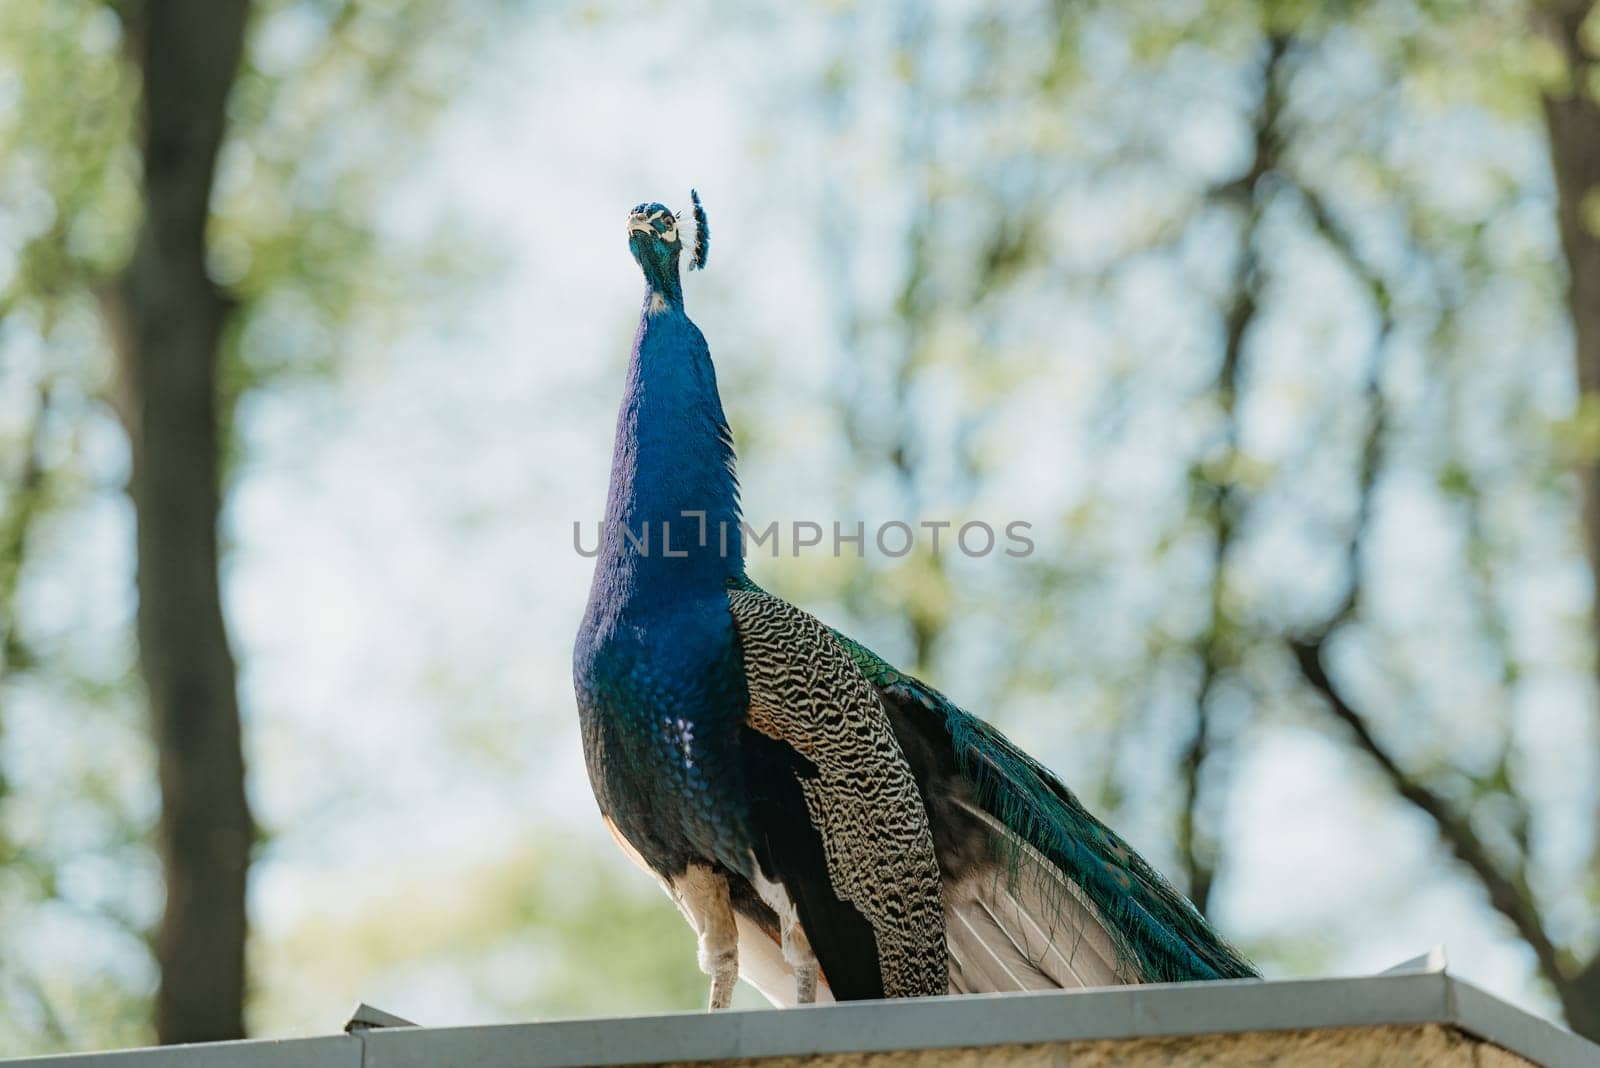 The Indian peafowl in the park in the morning by RomanJRoyce